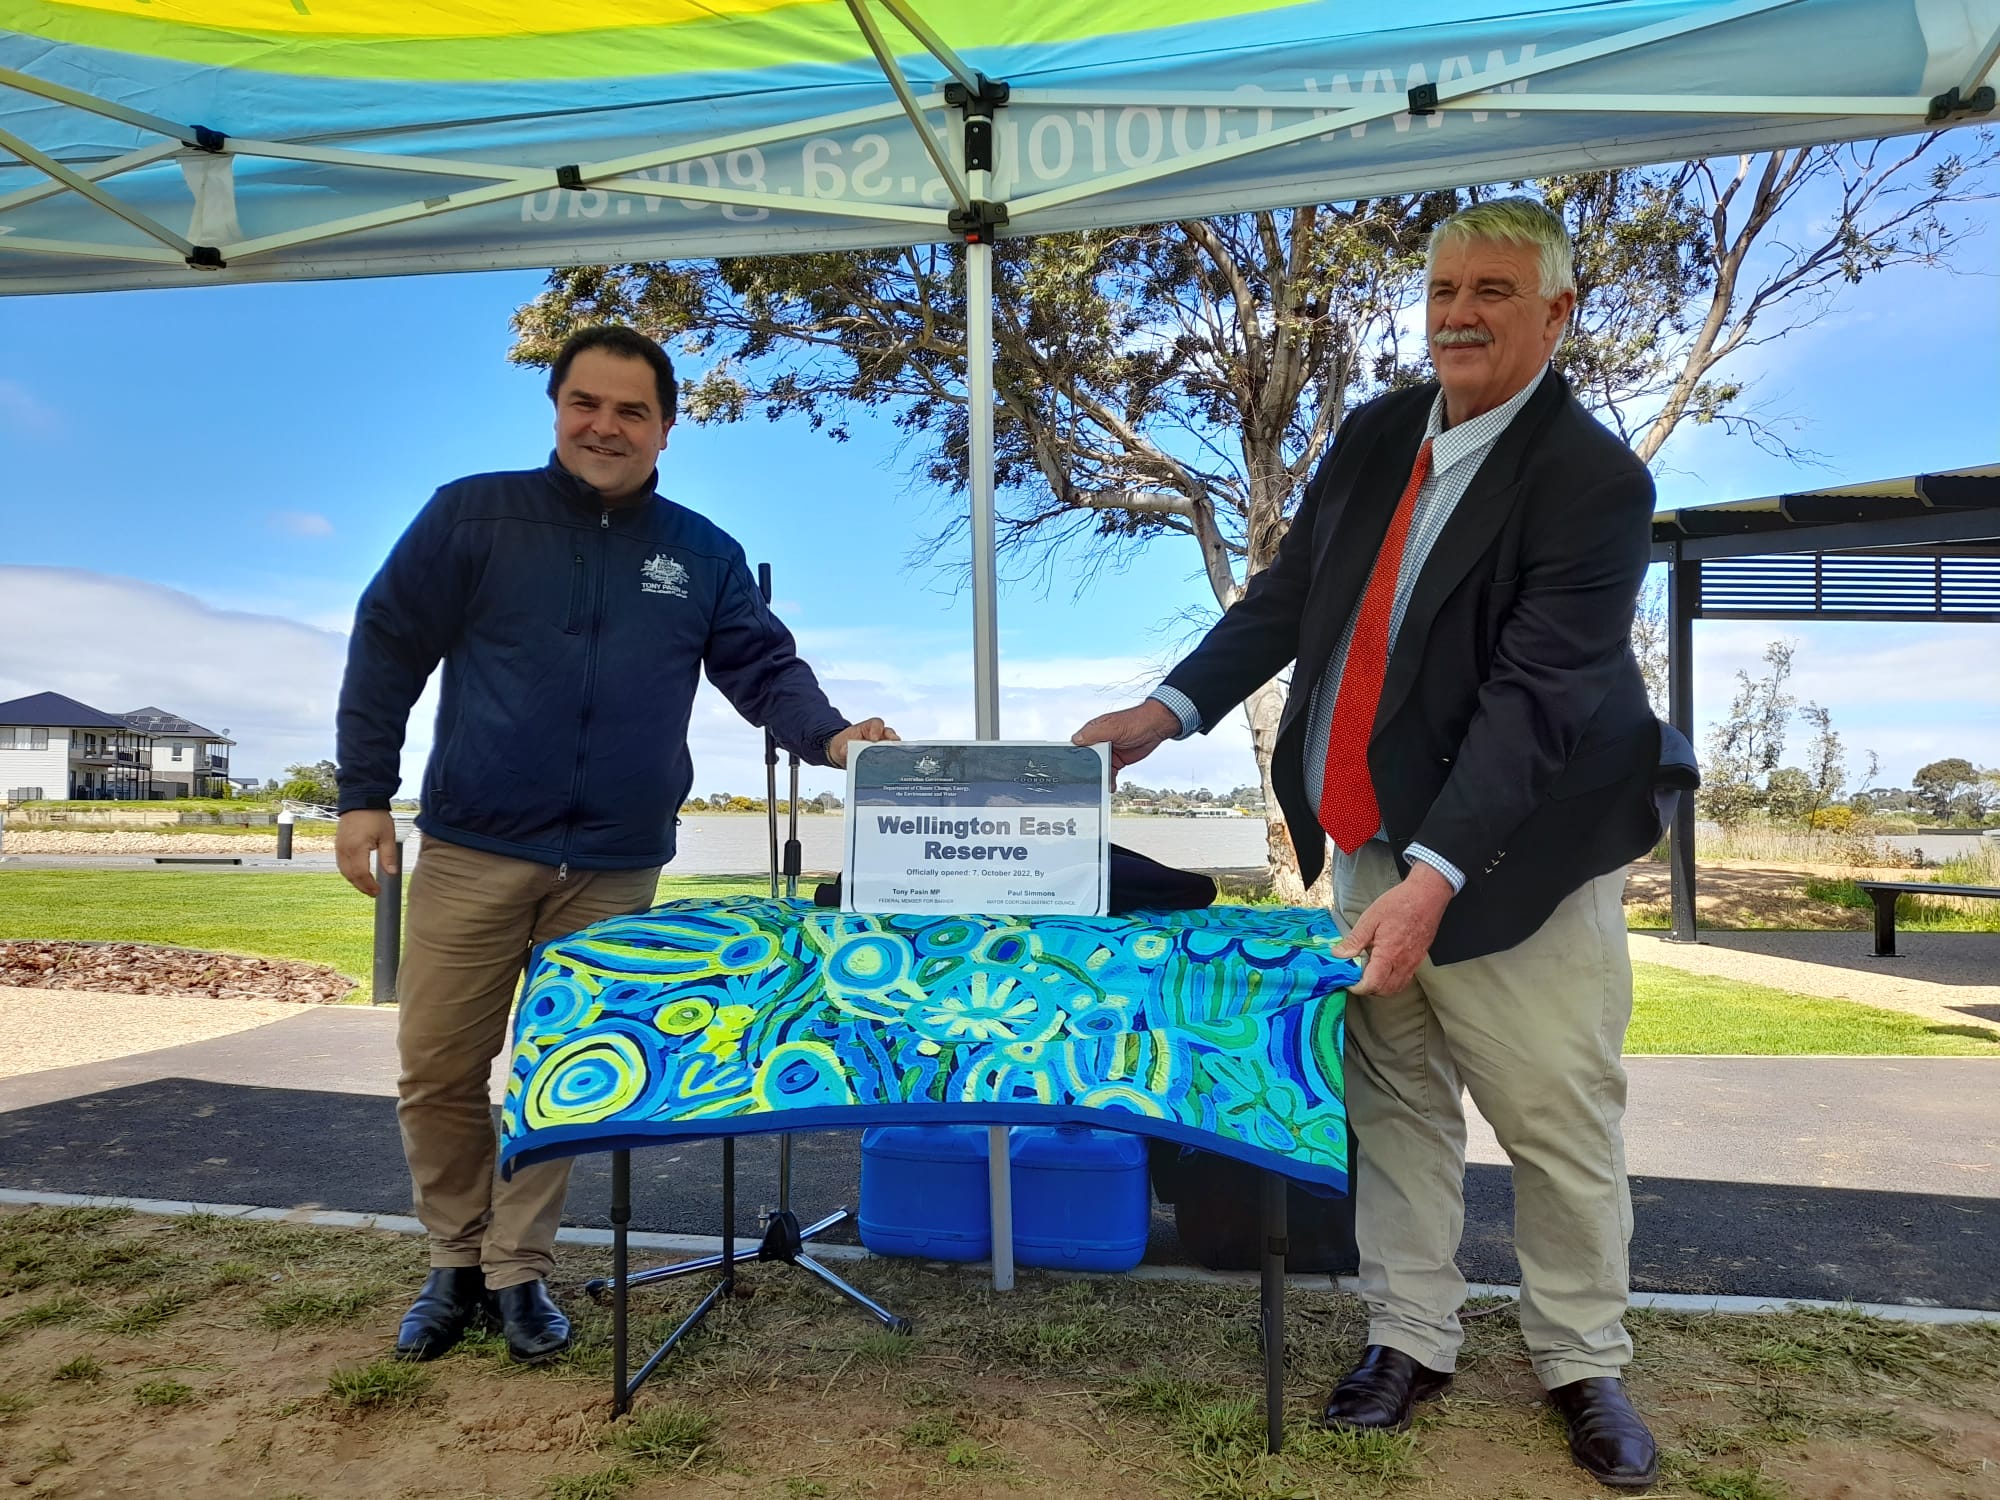 WELLINGTON EAST RESERVE OFFICALLY OPENED